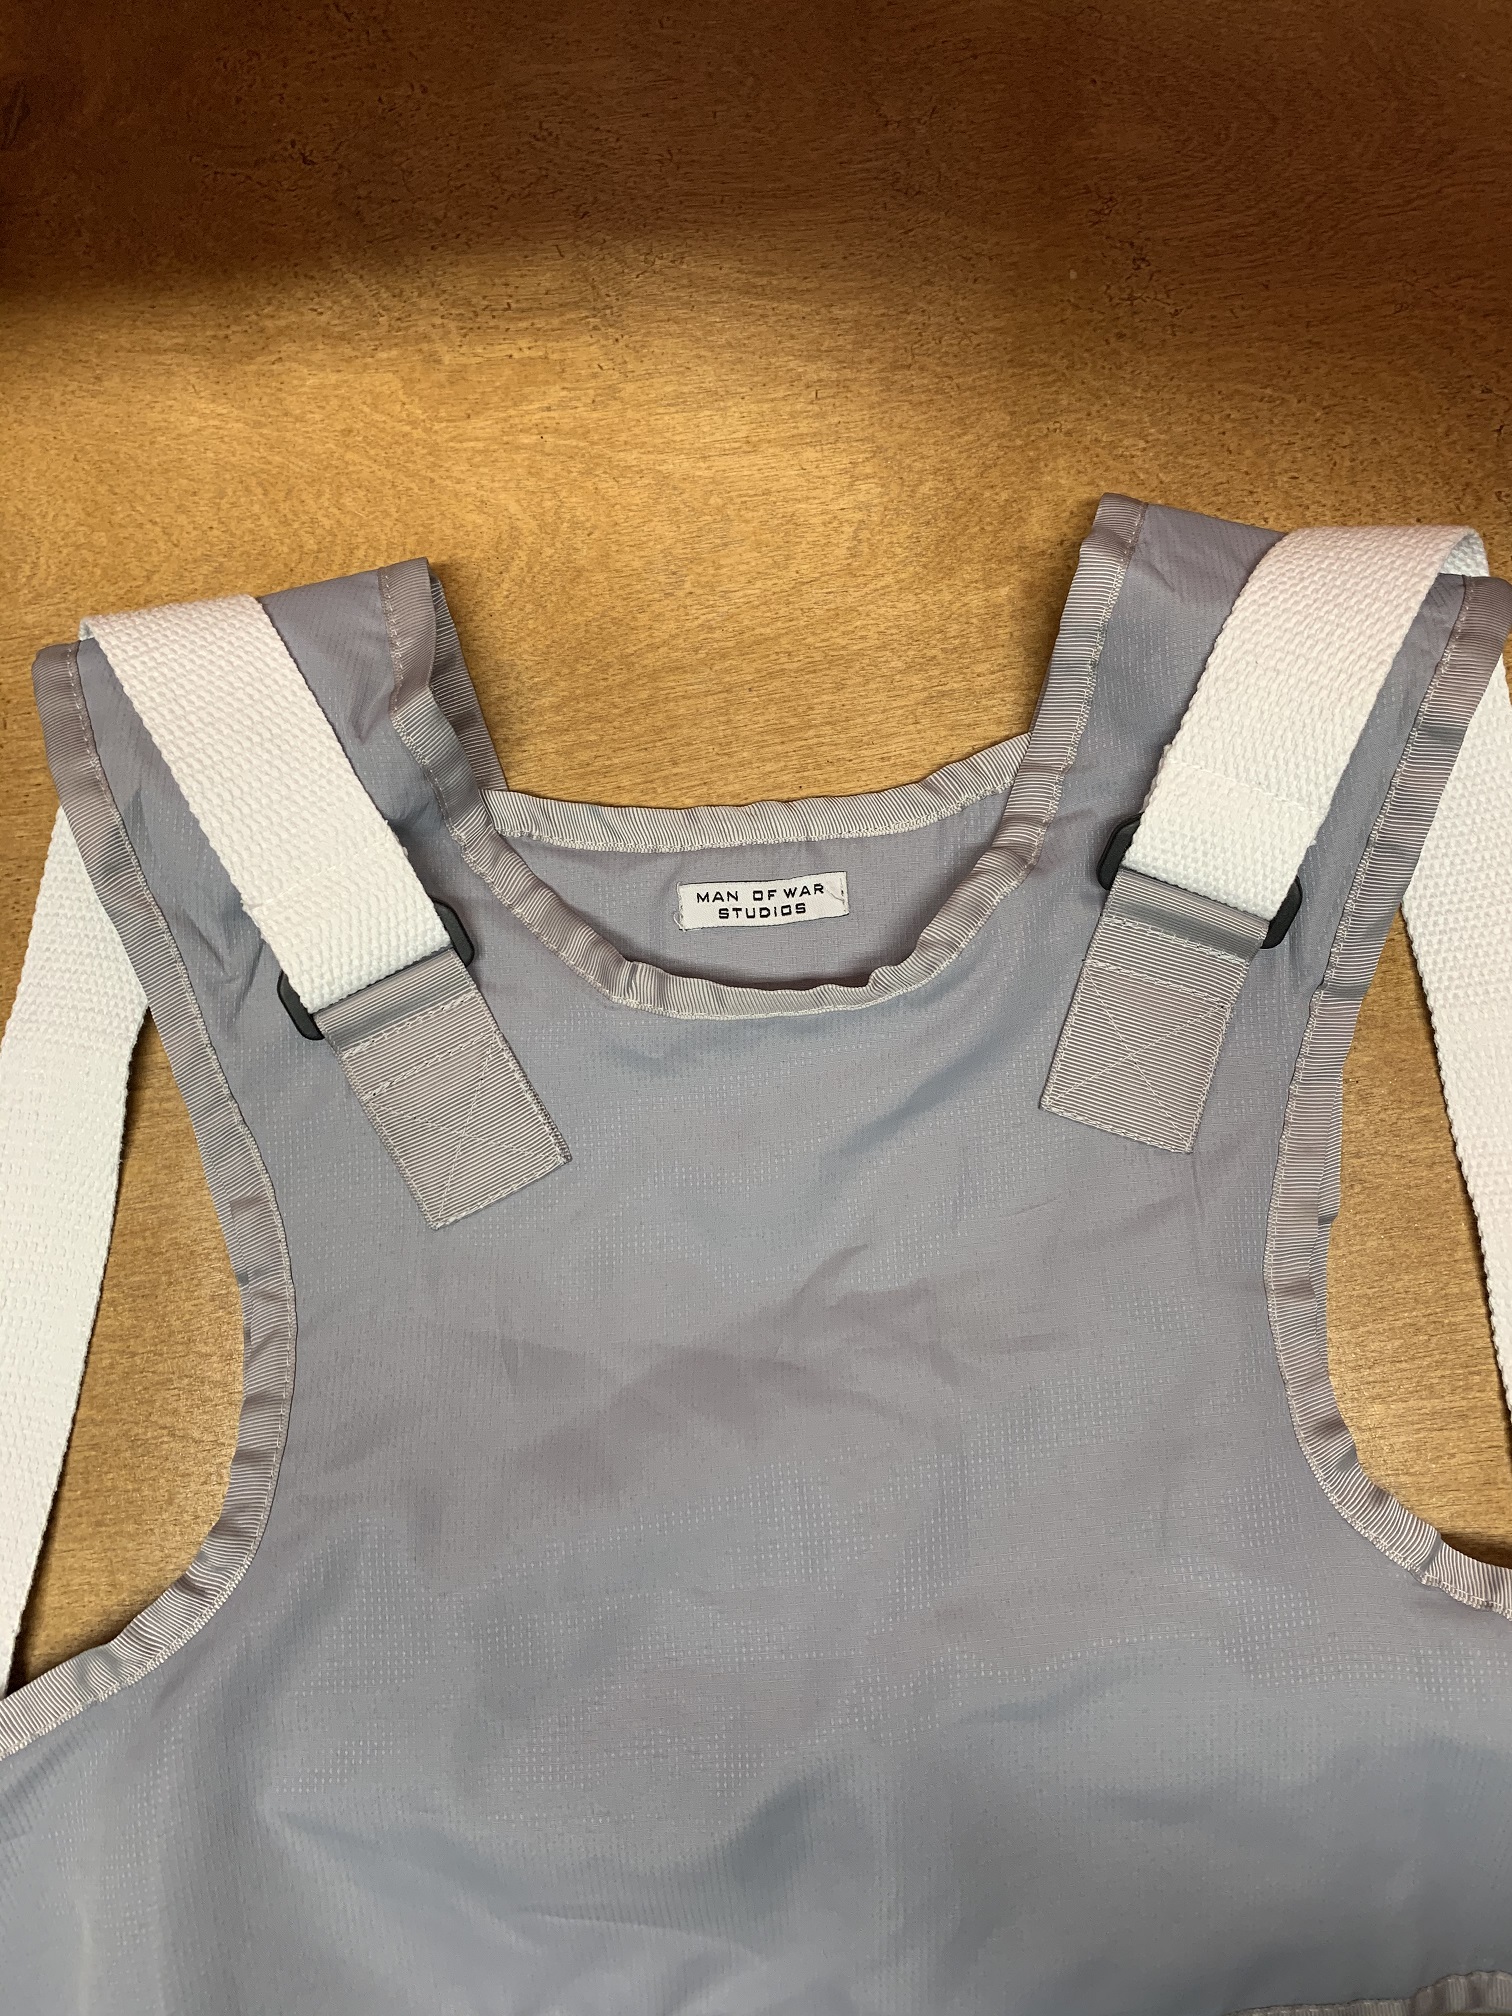 Jet Pack Harness with White Straps.jpg